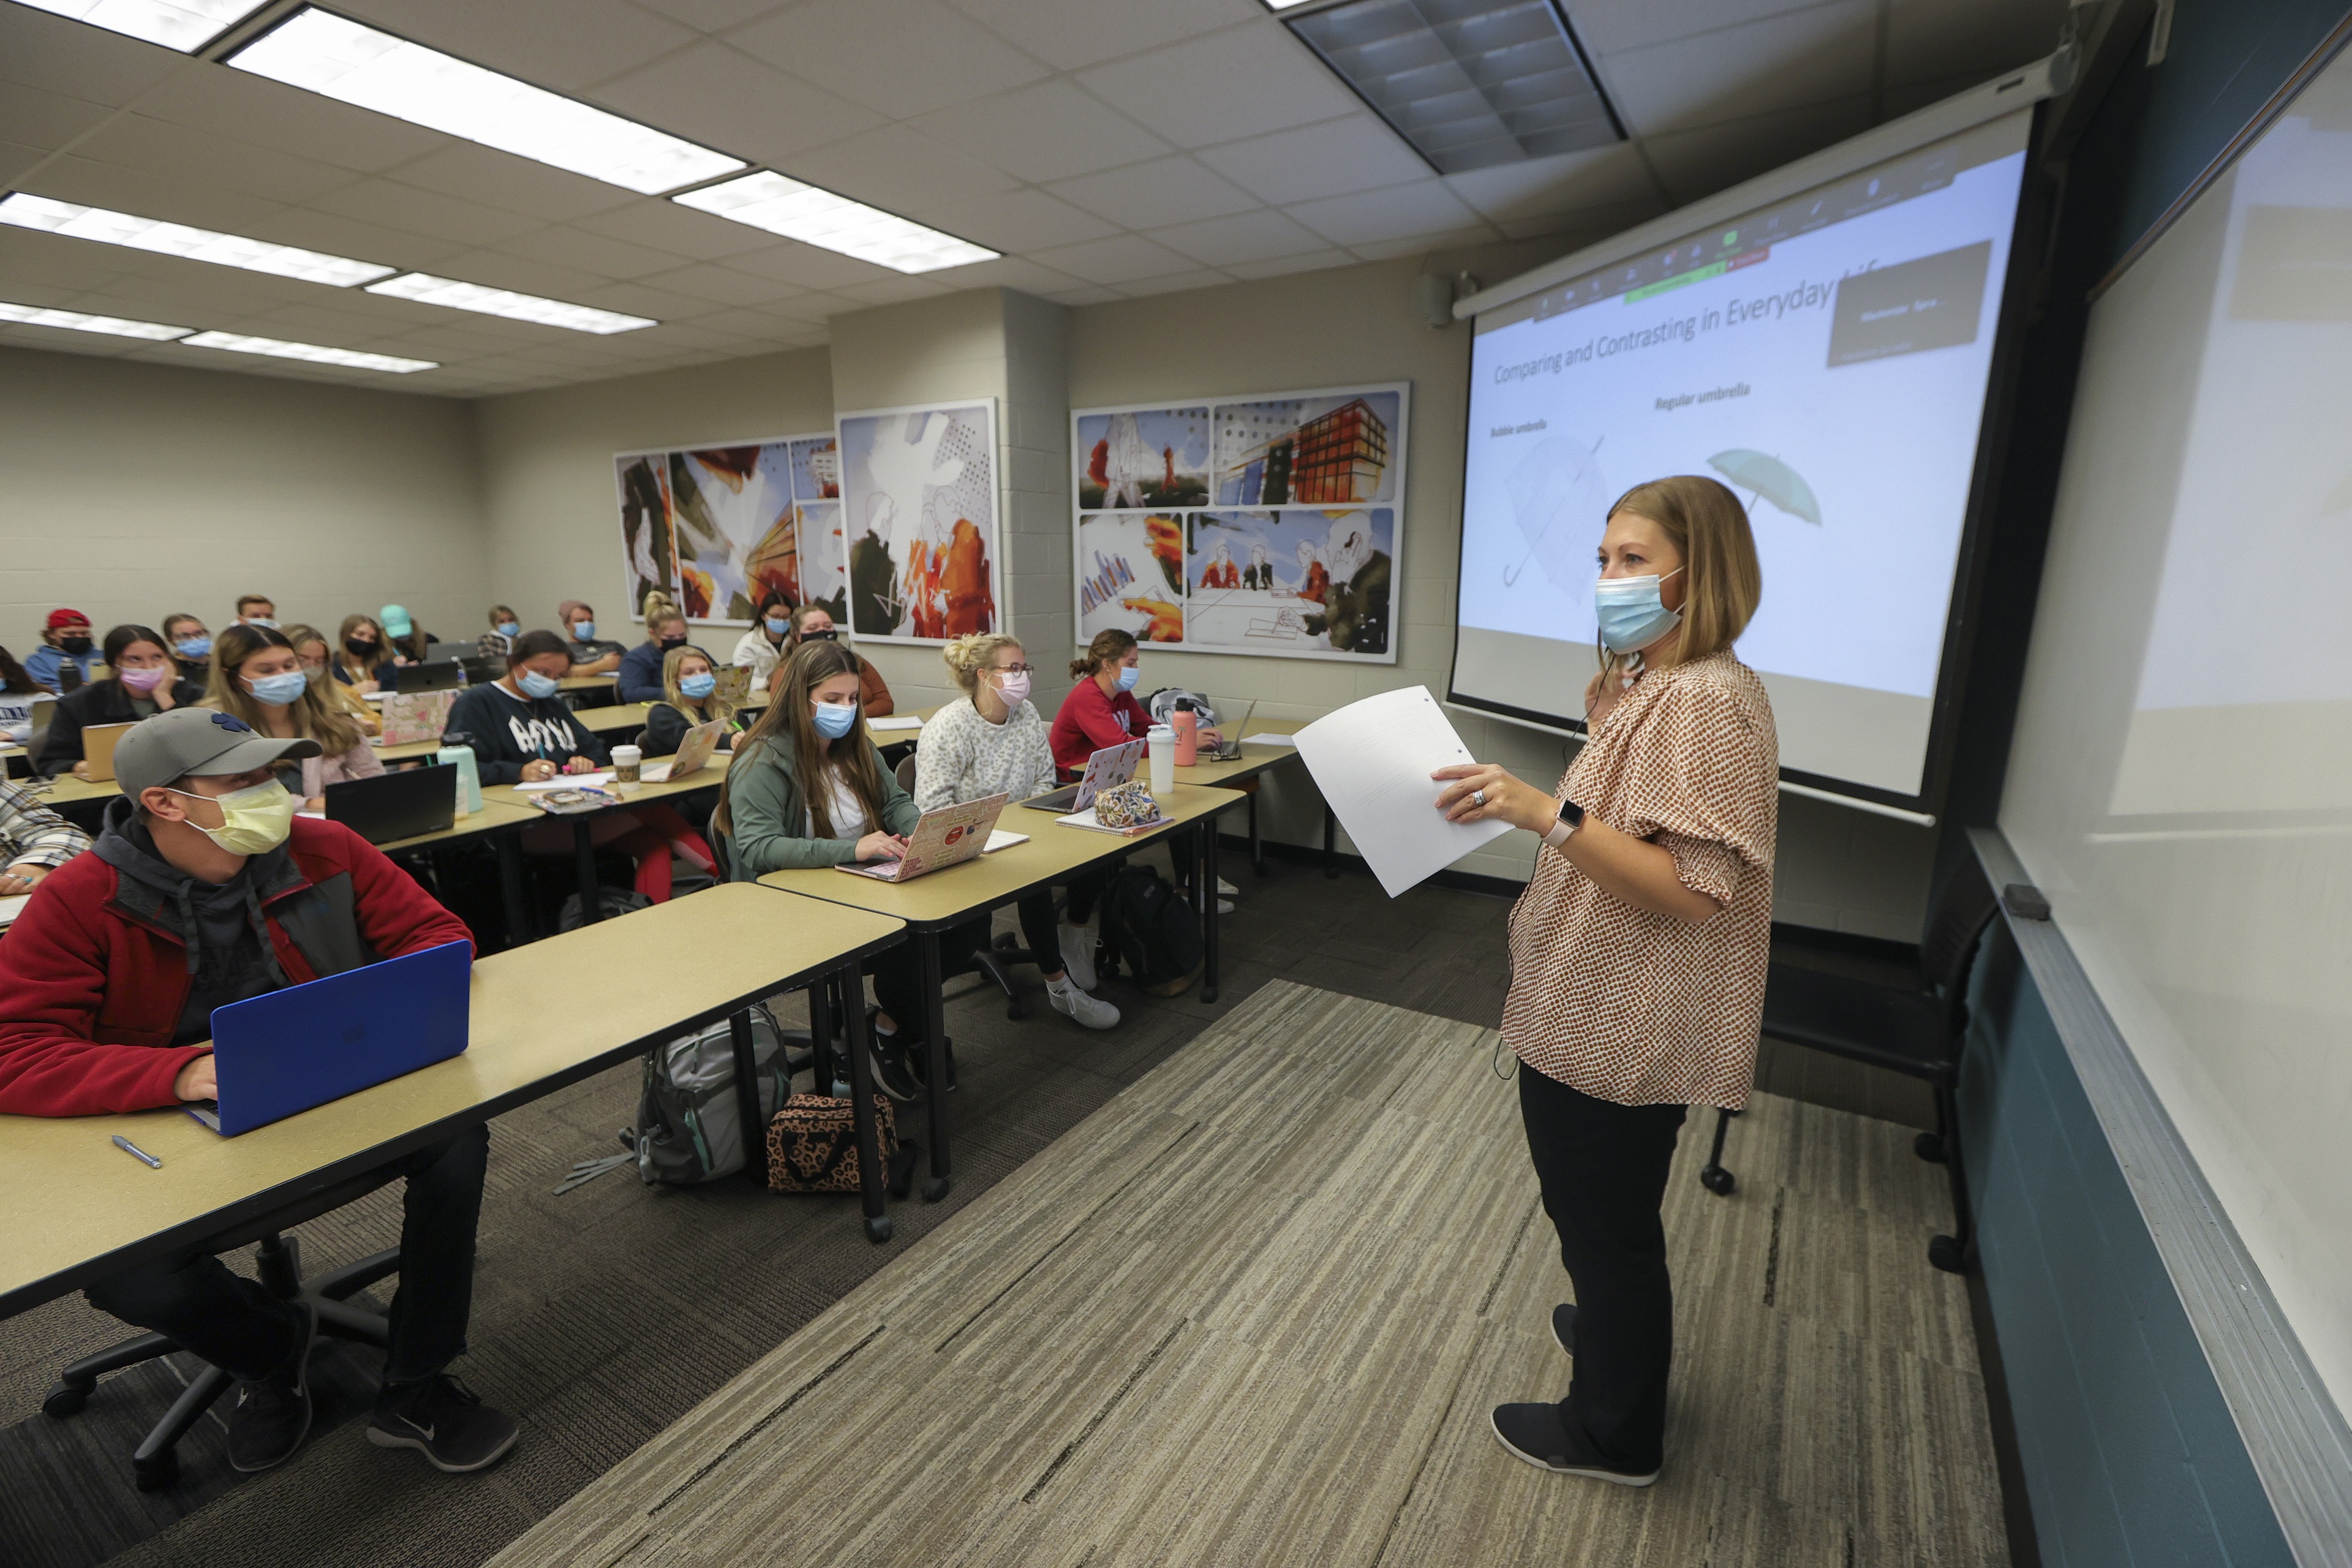 The first floor of Central Hall includes classrooms and computer labs. Here, Dr. Shelly Bussard, director of the School of Nursing, teaches a course in clinical judgment. The course is a critical piece of the overall curriculum, serving as the foundation for "learning to think like a nurse.”